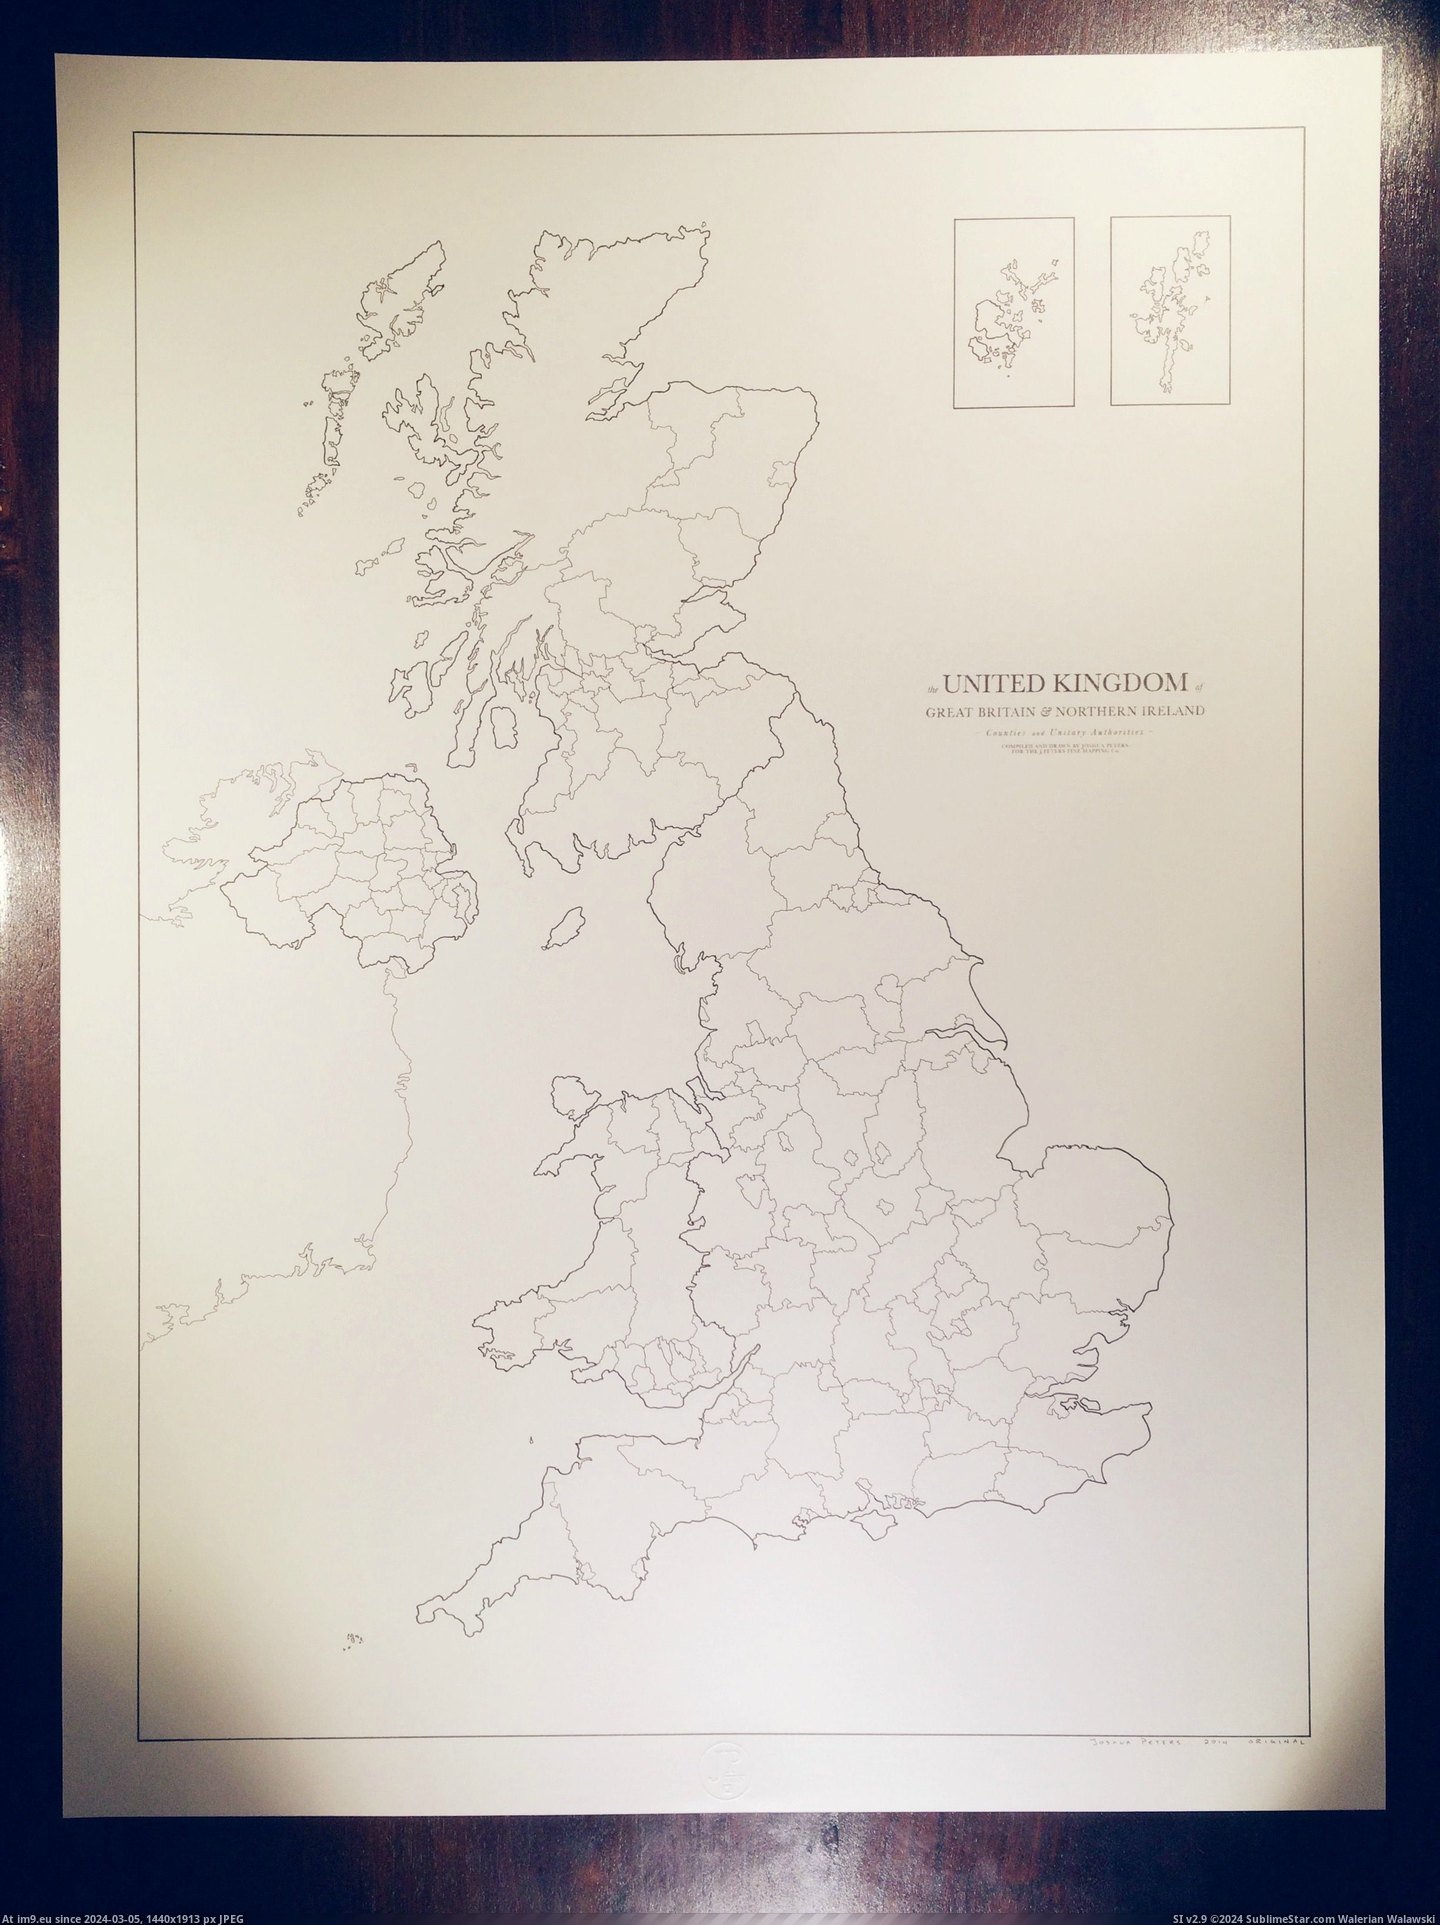 #Great #United #Northern #Britain #Boundaries #Ireland #Kingdom #Counties [Mapporn] The United Kingdom of Great Britain & Northern Ireland: Counties and Unitary Boundaries [2448 × 3264] Pic. (Image of album My r/MAPS favs))